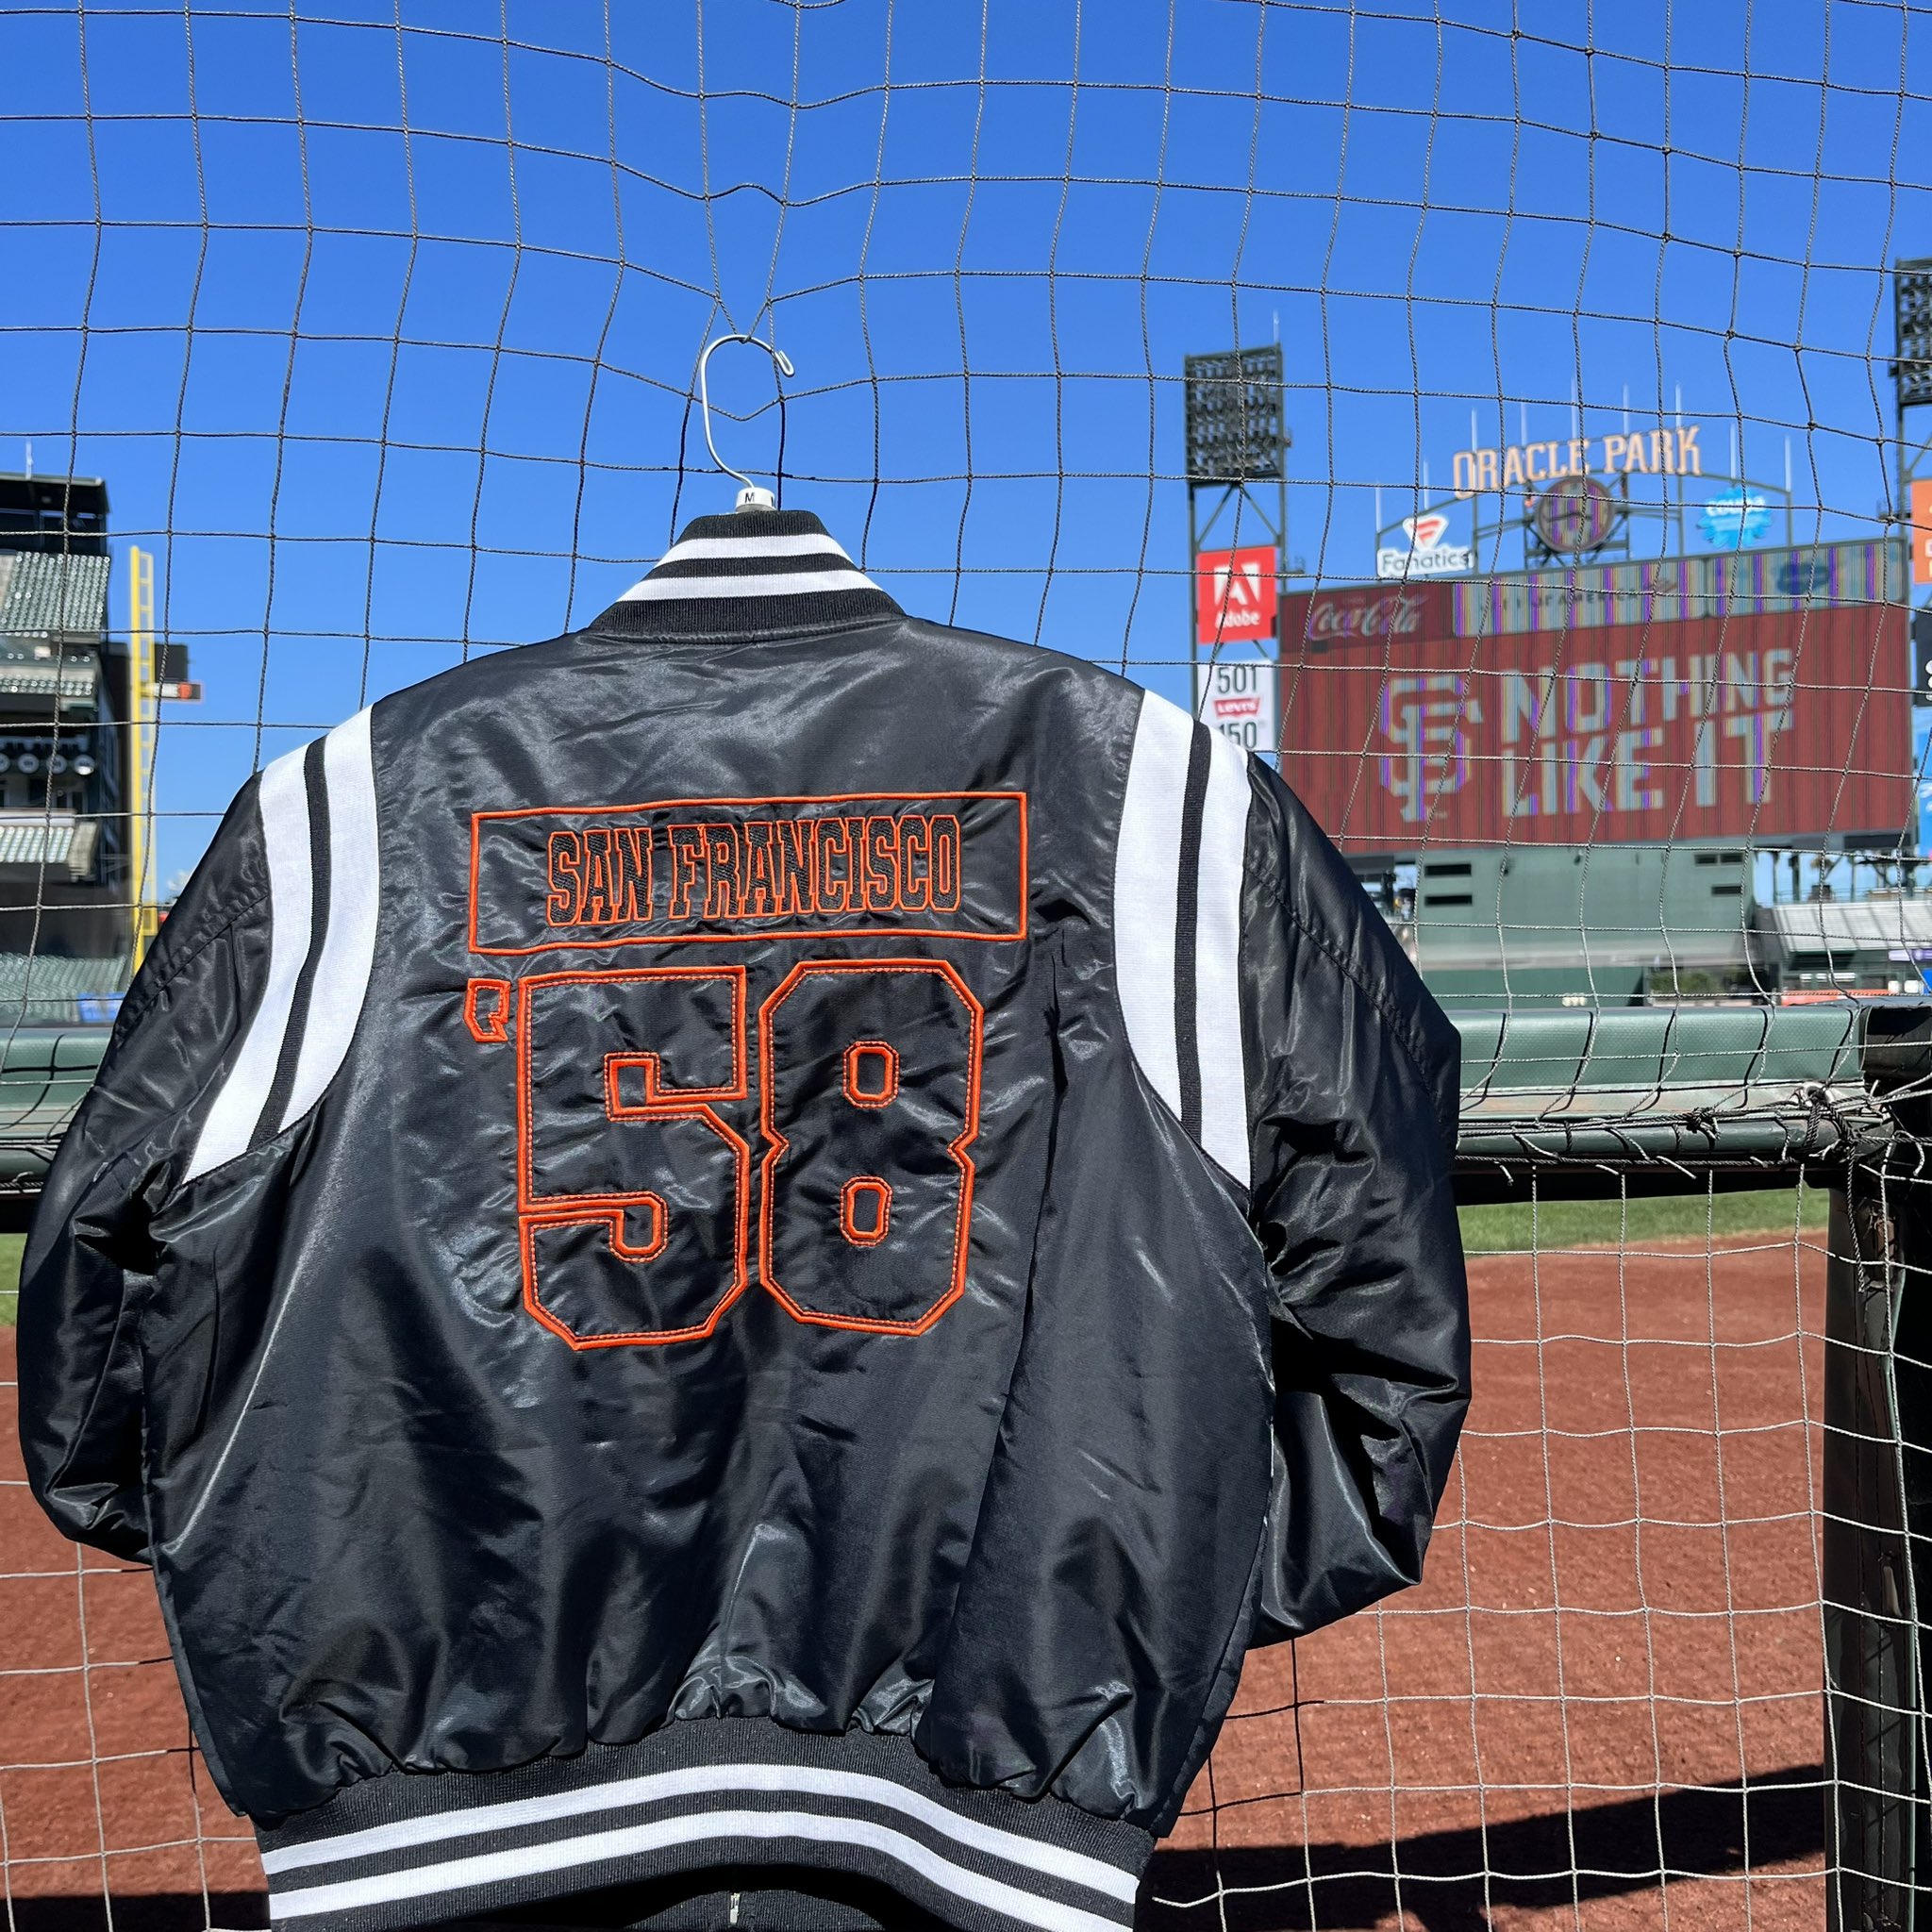 Giants Dugout Store (@sfgdugoutstore) • Instagram photos and videos